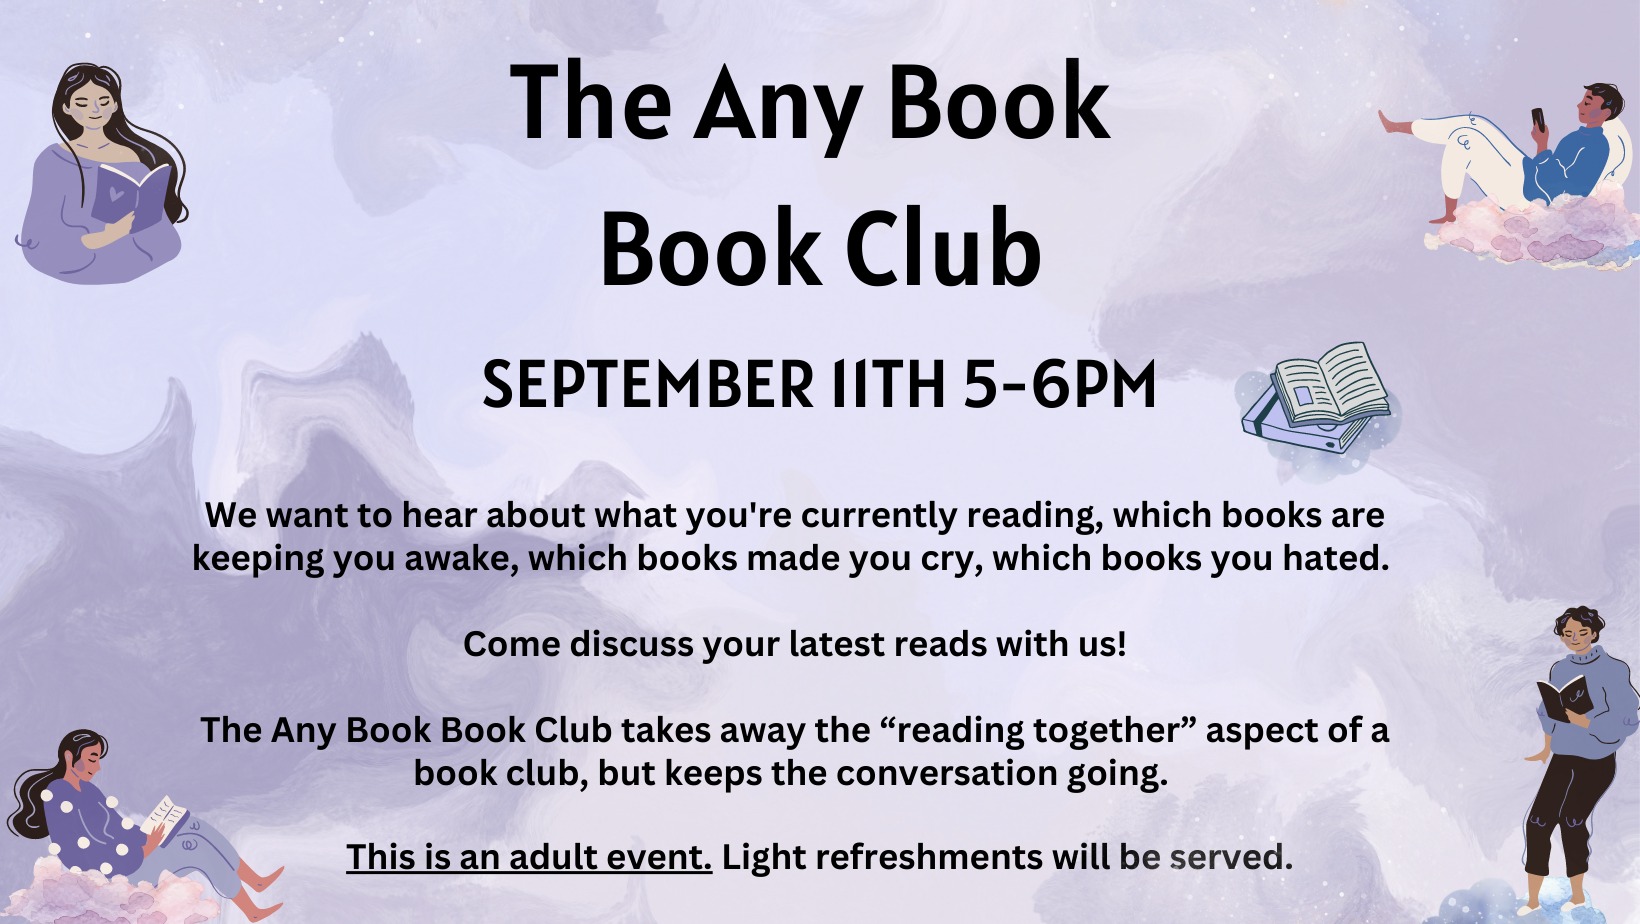 Any Book Book Club, September 11, 5-6 pm